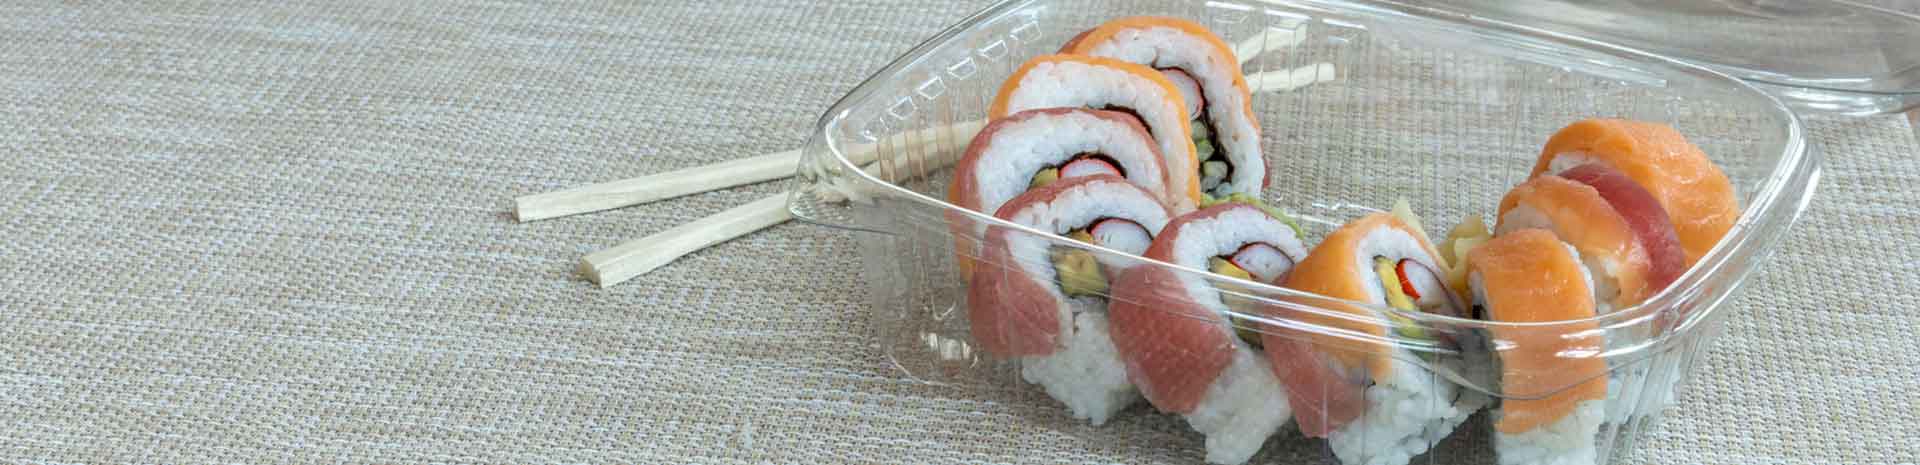 sushi in clear hinged container on table